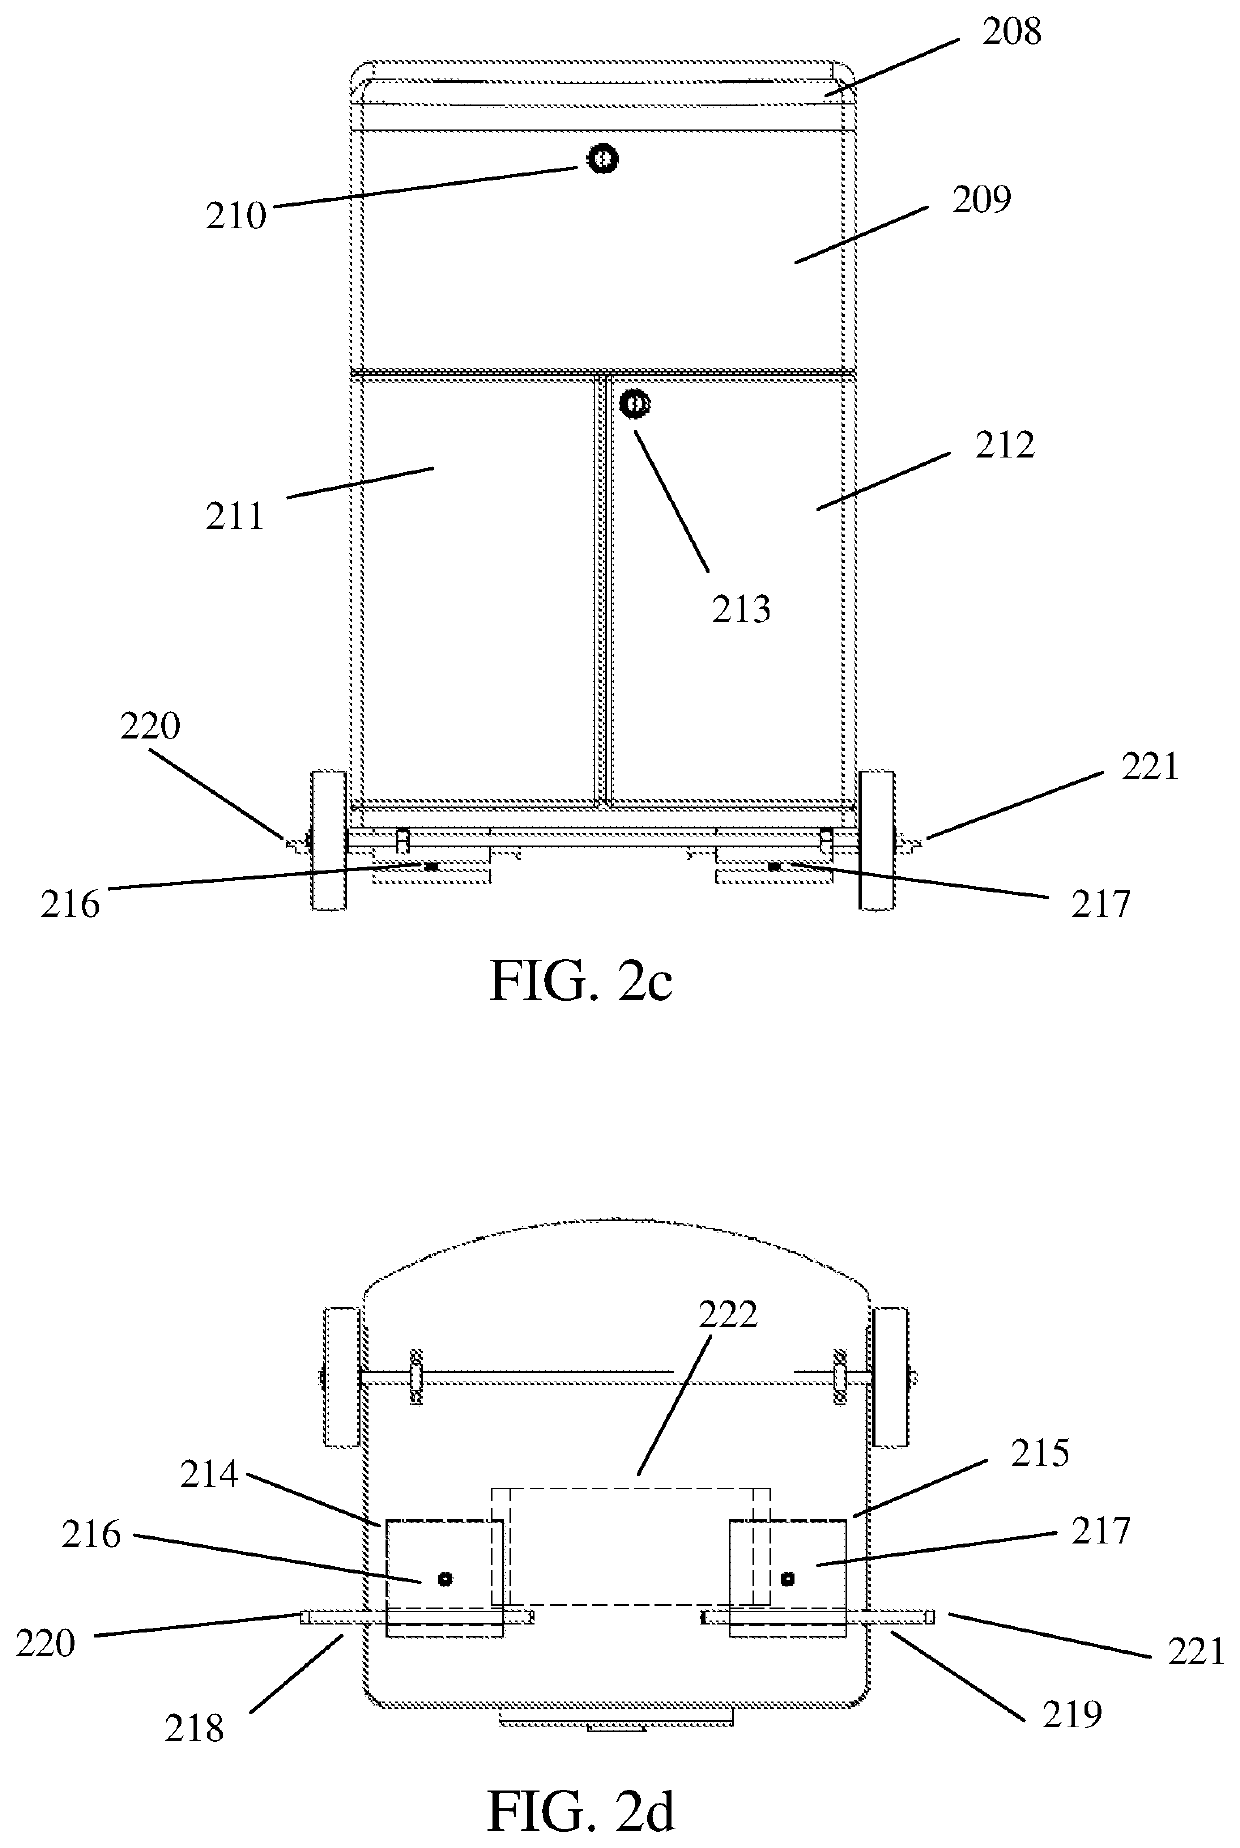 Attachment system for removable storage module for golf cart